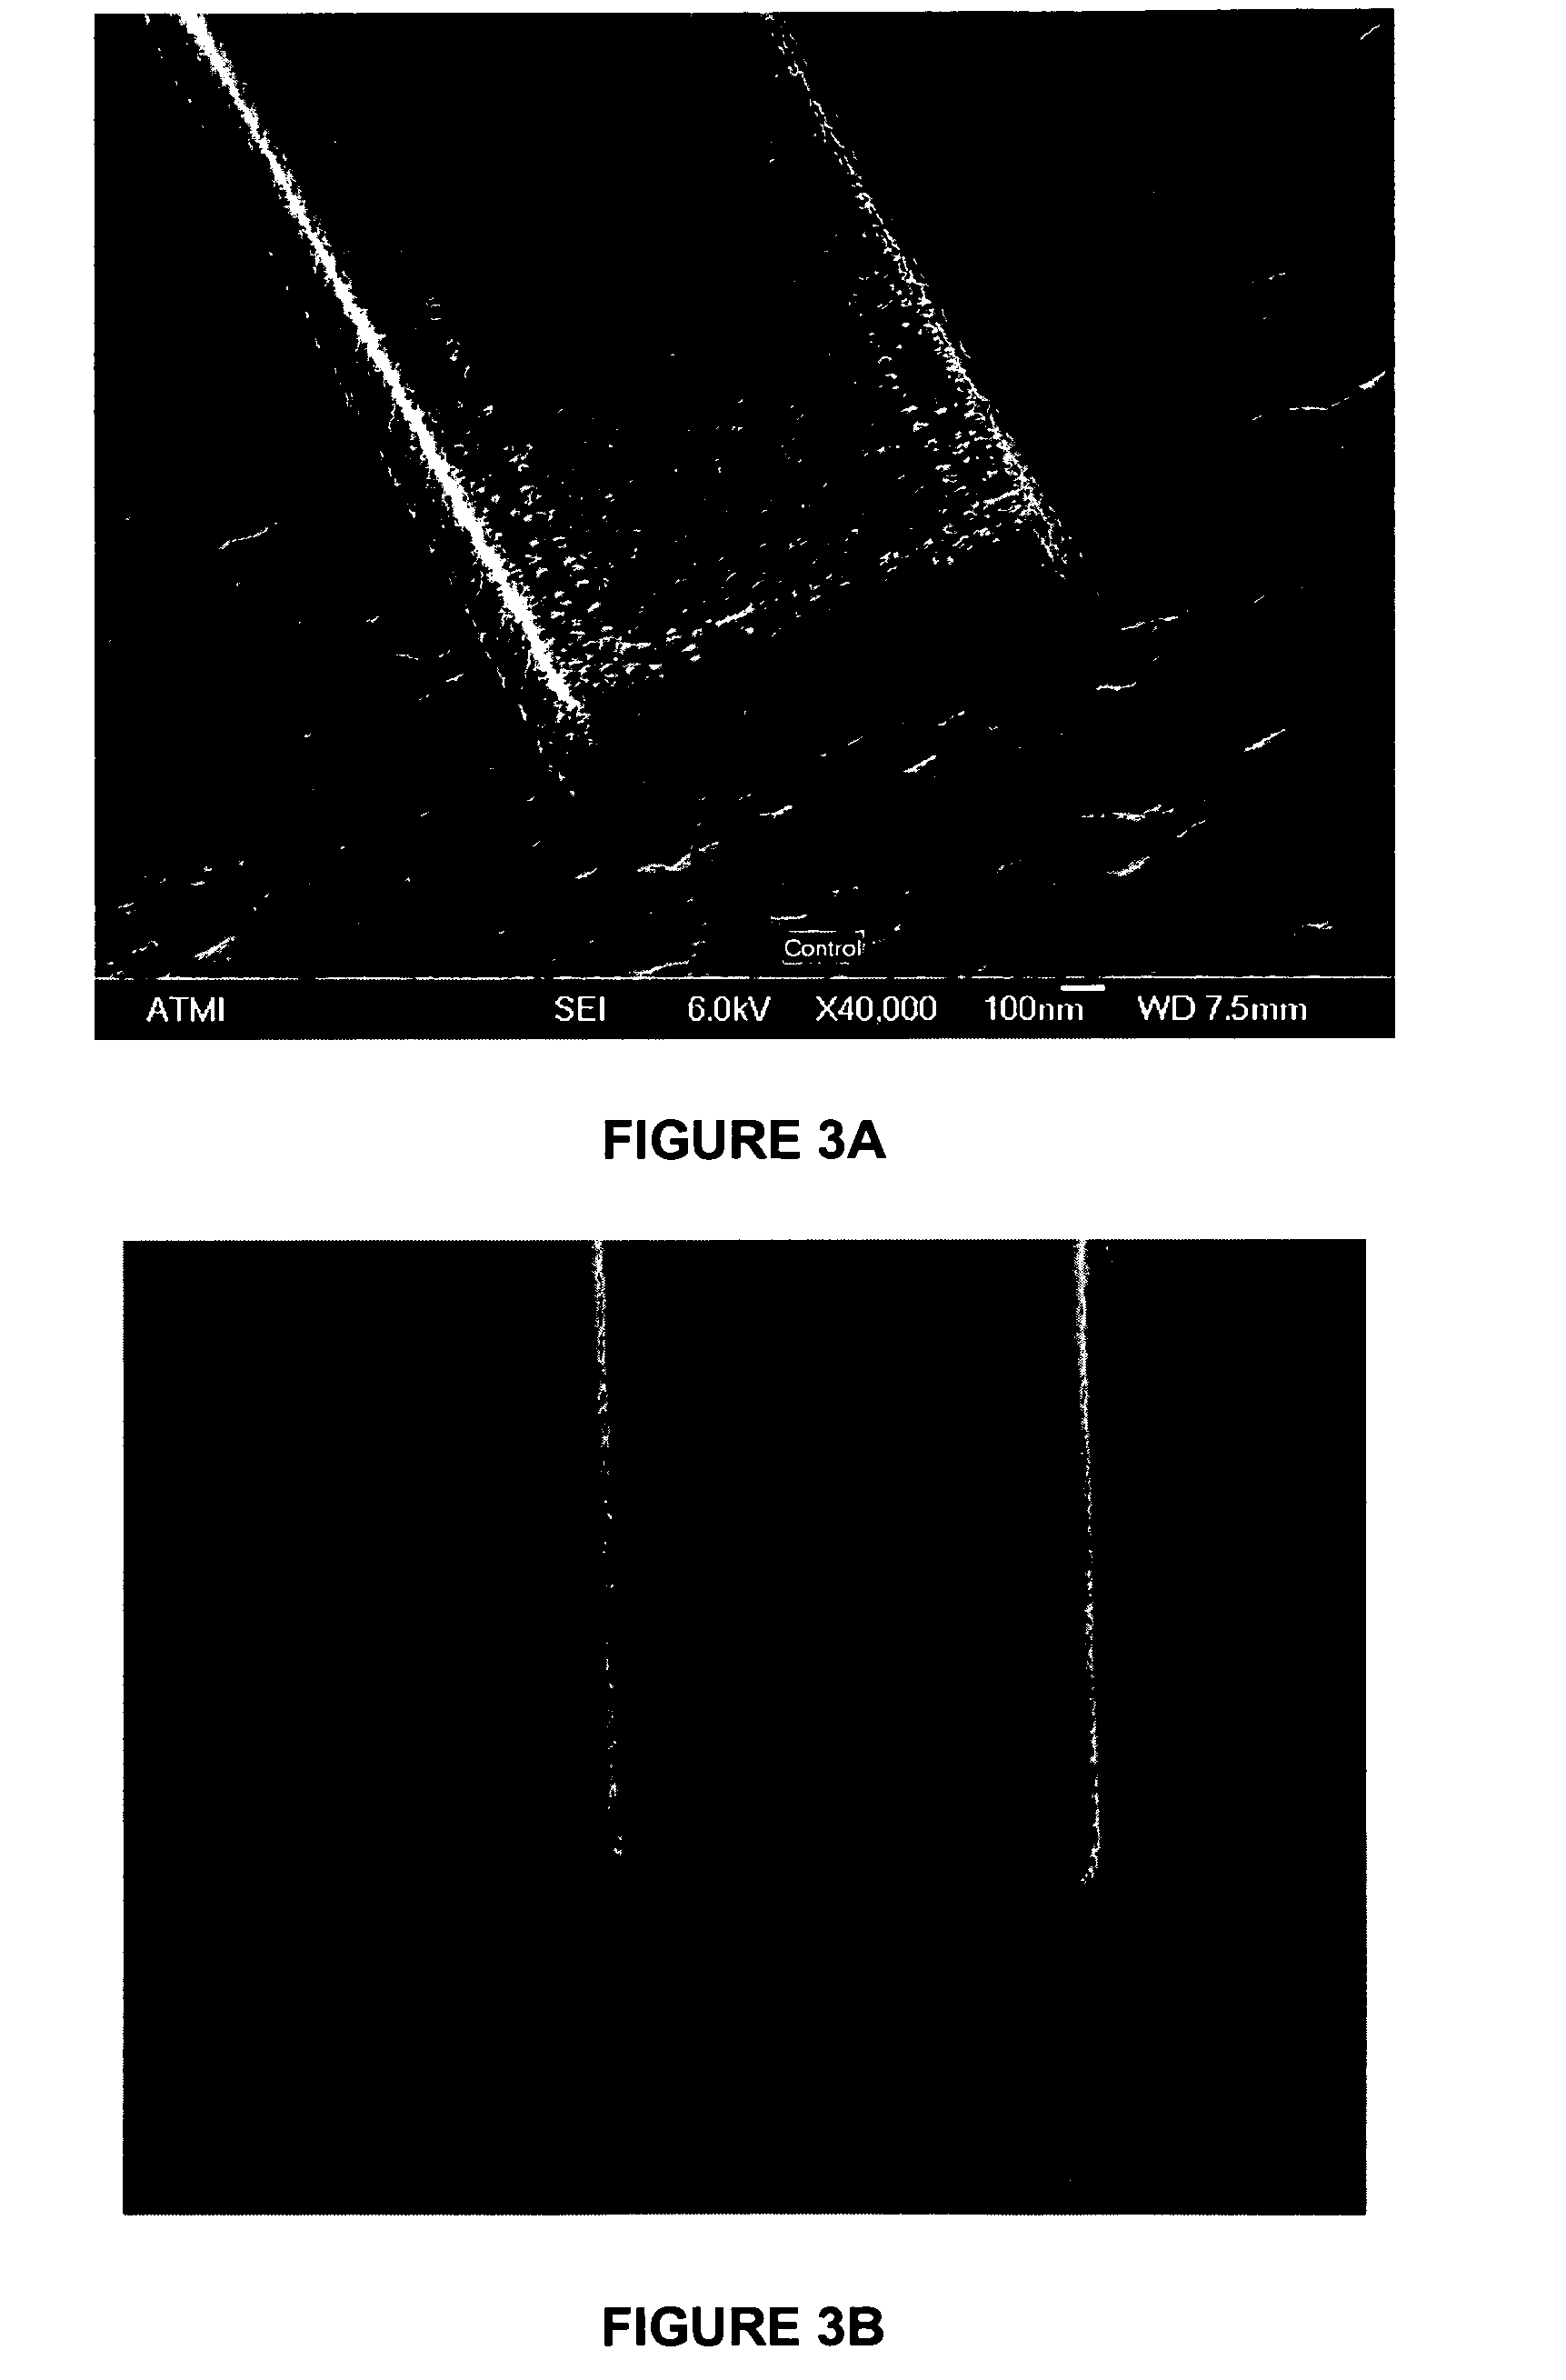 Copper passivating post-chemical mechanical polishing cleaning composition and method of use